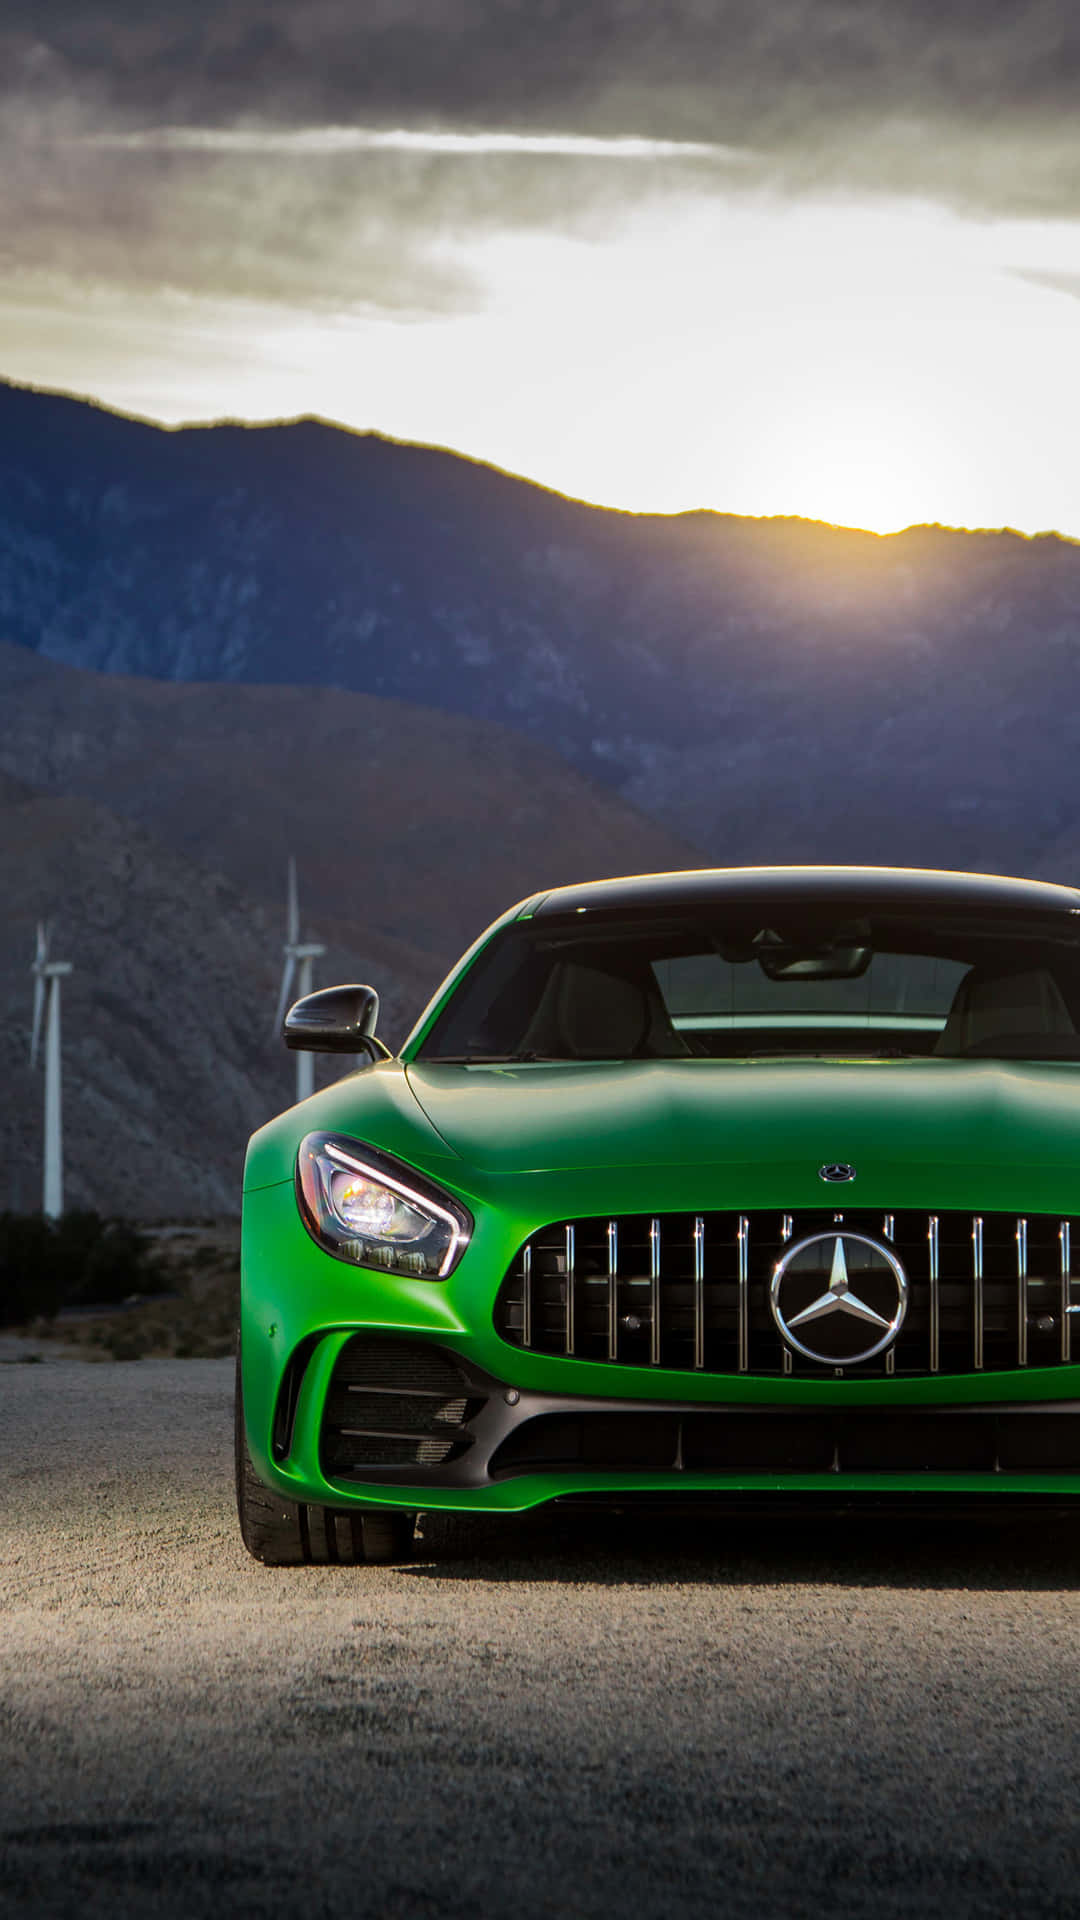 Mercedes Benz Amg Gt R With Sunset Sky Background